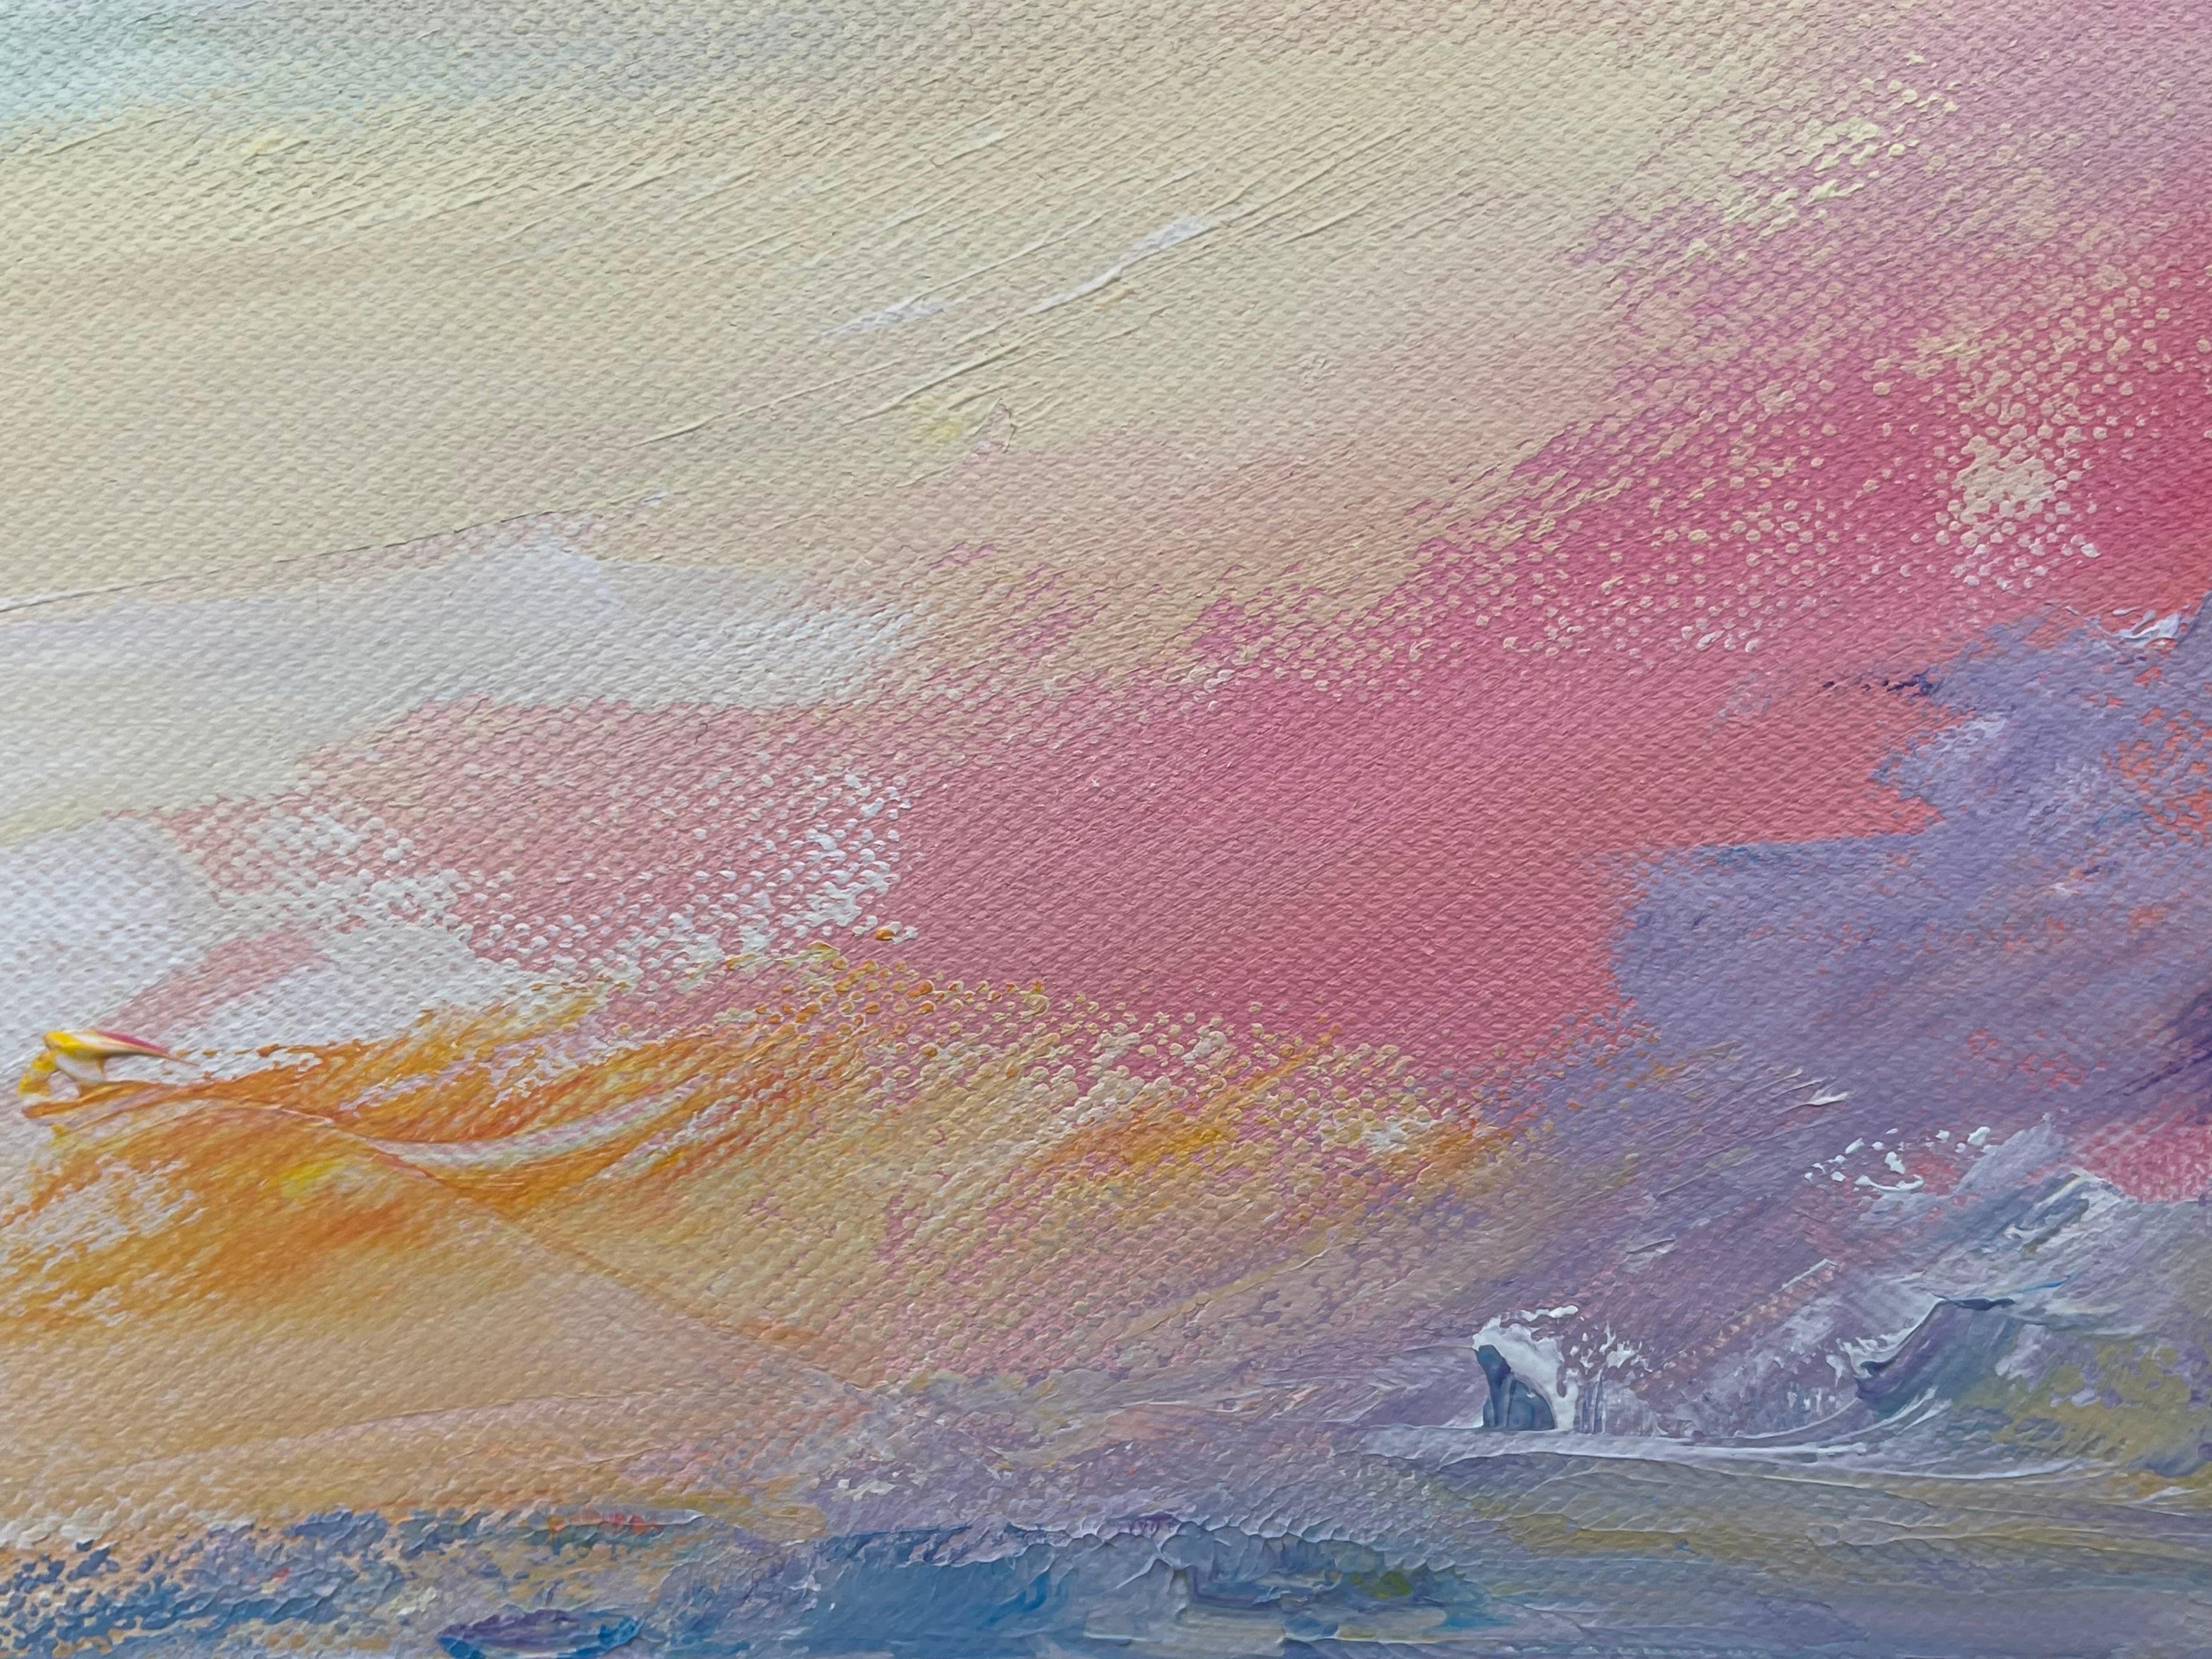 Serene Abstract Impressionist Seascape Landscape by Contemporary British Artist For Sale 3